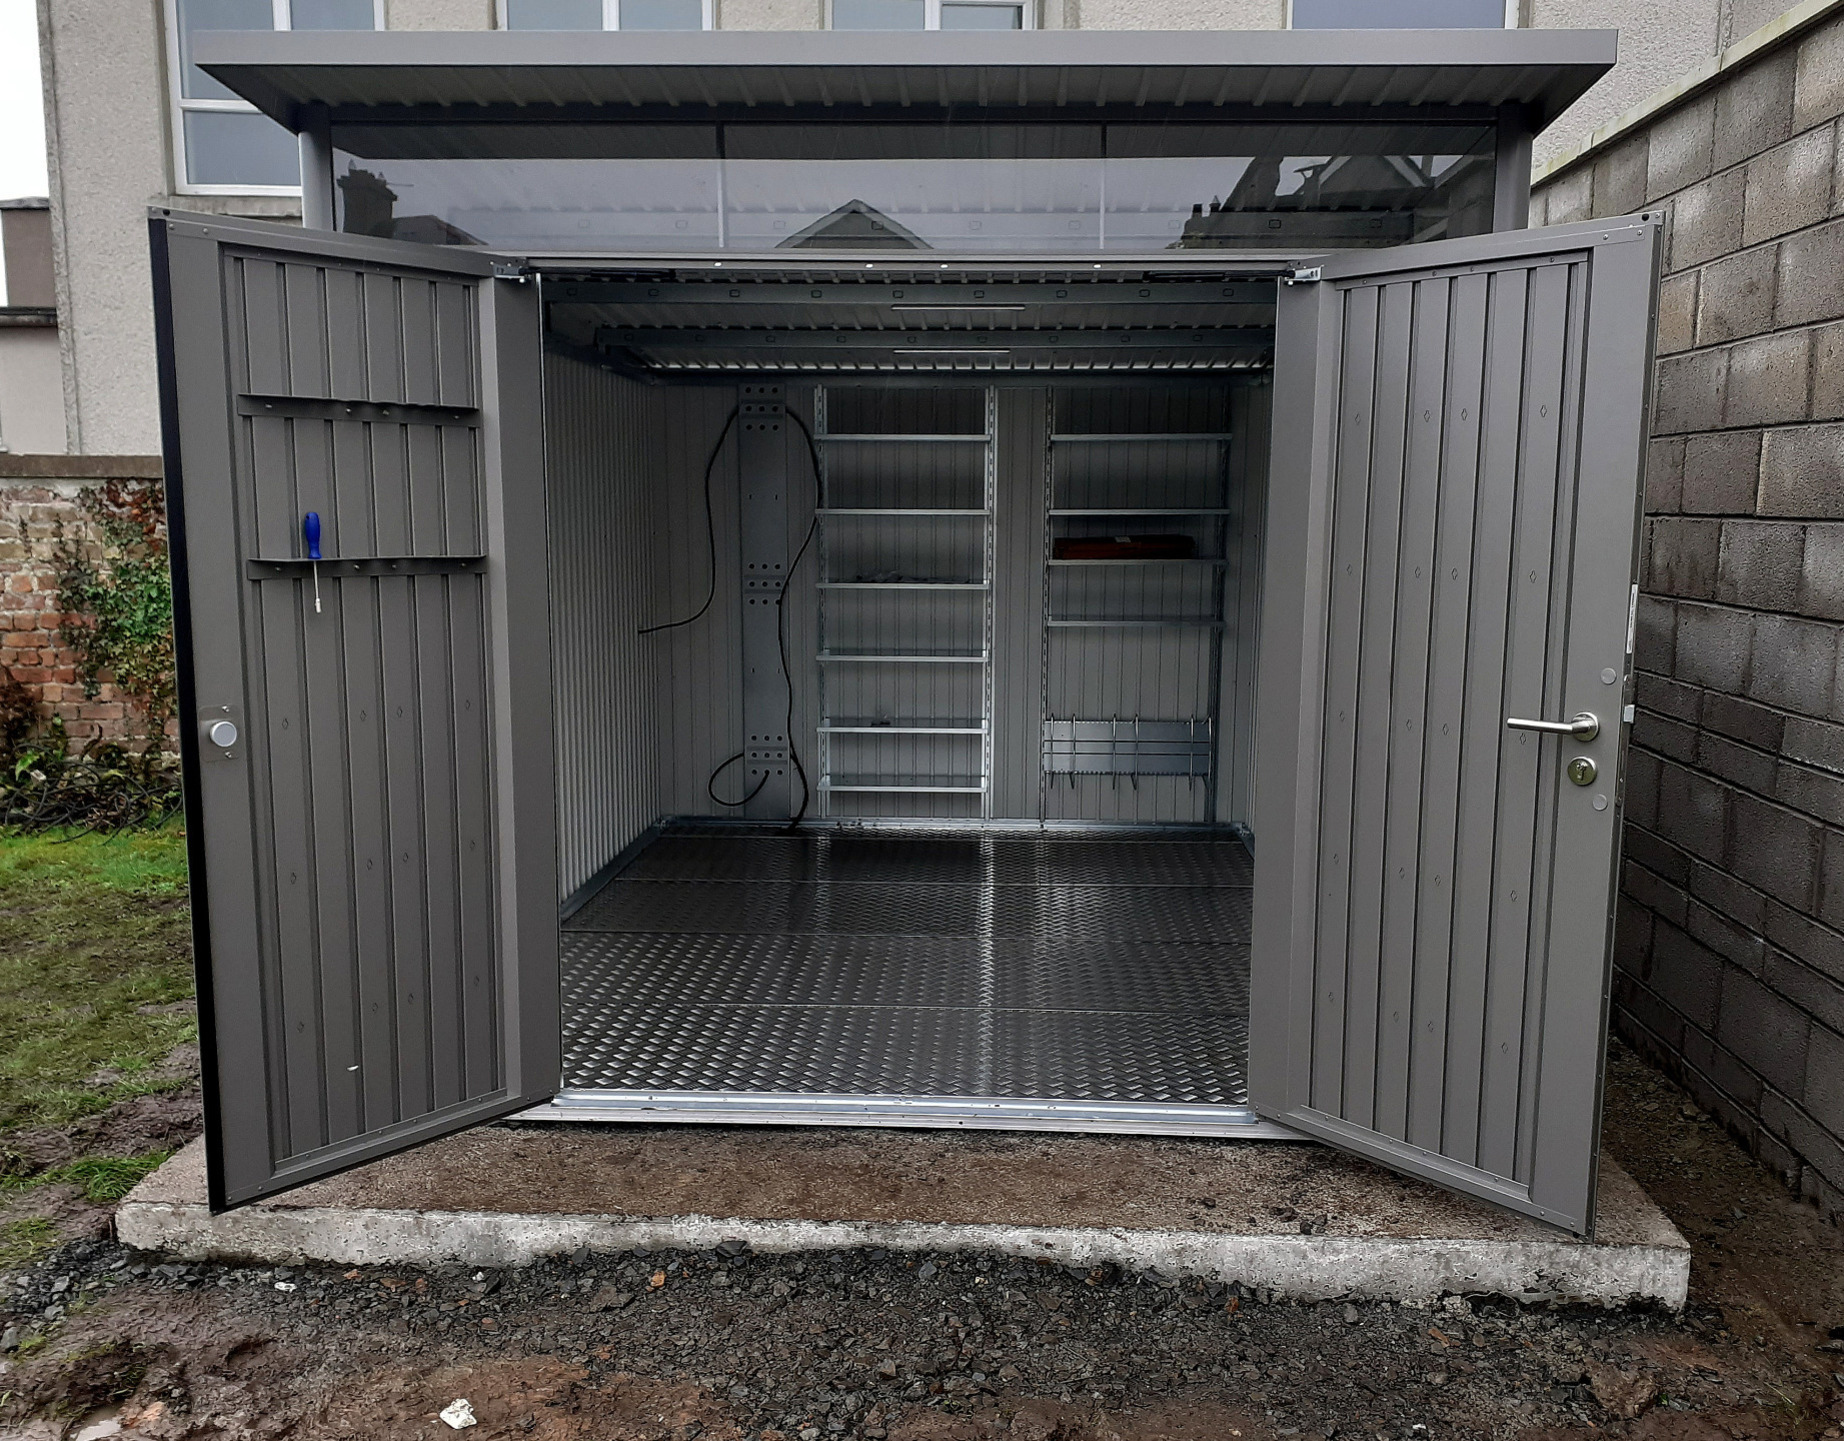 Biohort AvantGarde A8 Garden Shed in metallic quartz grey with double doors, supplied & fitted in Limerick | Owen Chubb Ireland's Leading supplier of Biohort Garden Sheds & Storage Solutions | Supplied + Fitted Nationwide